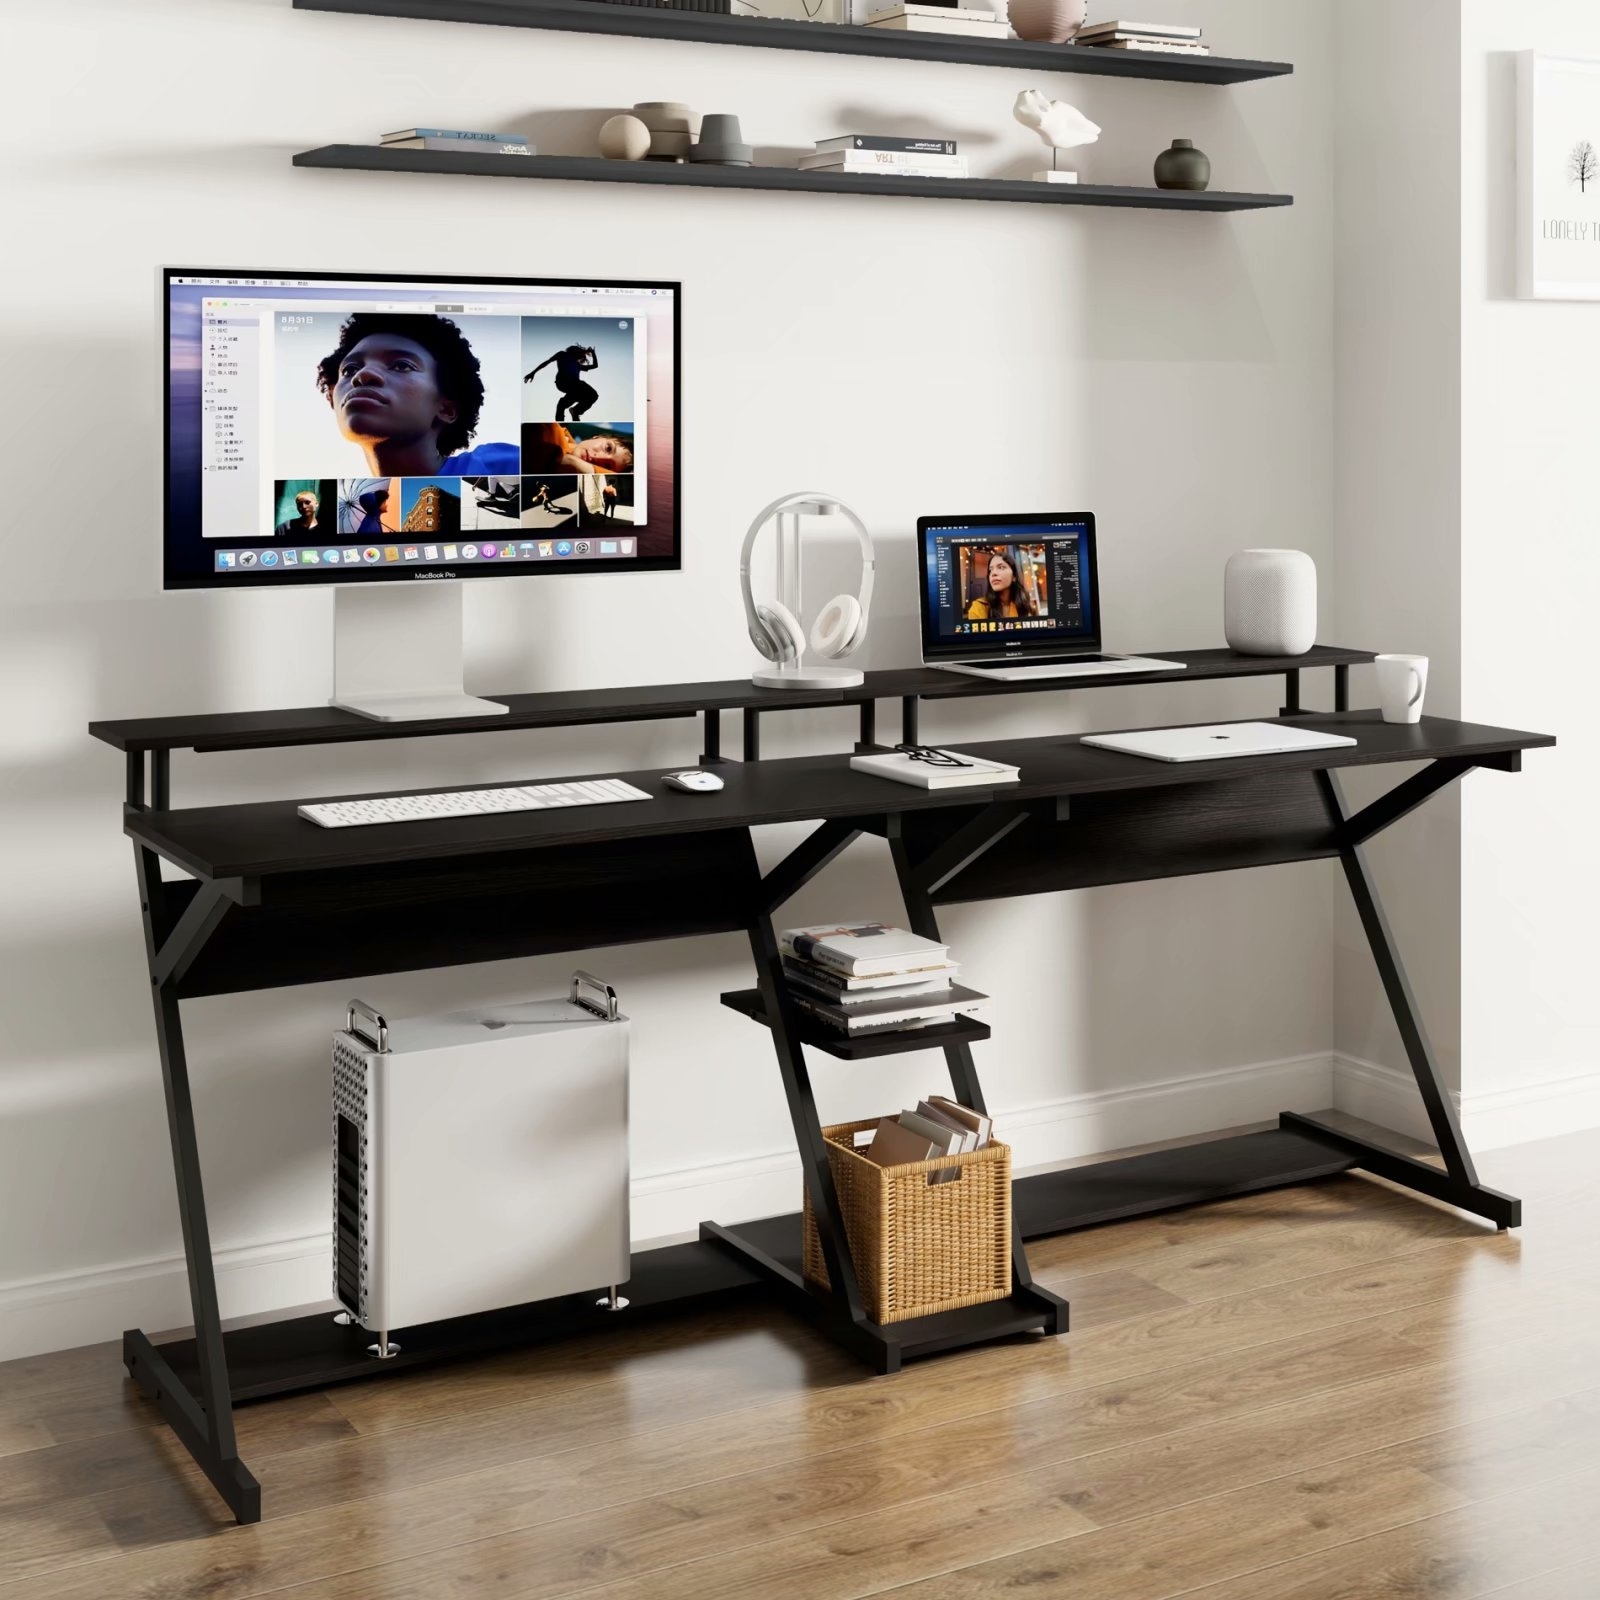 Details about   Home Office Rotating Computer Desk Workstation Study PC Table w/Storage Shelves 